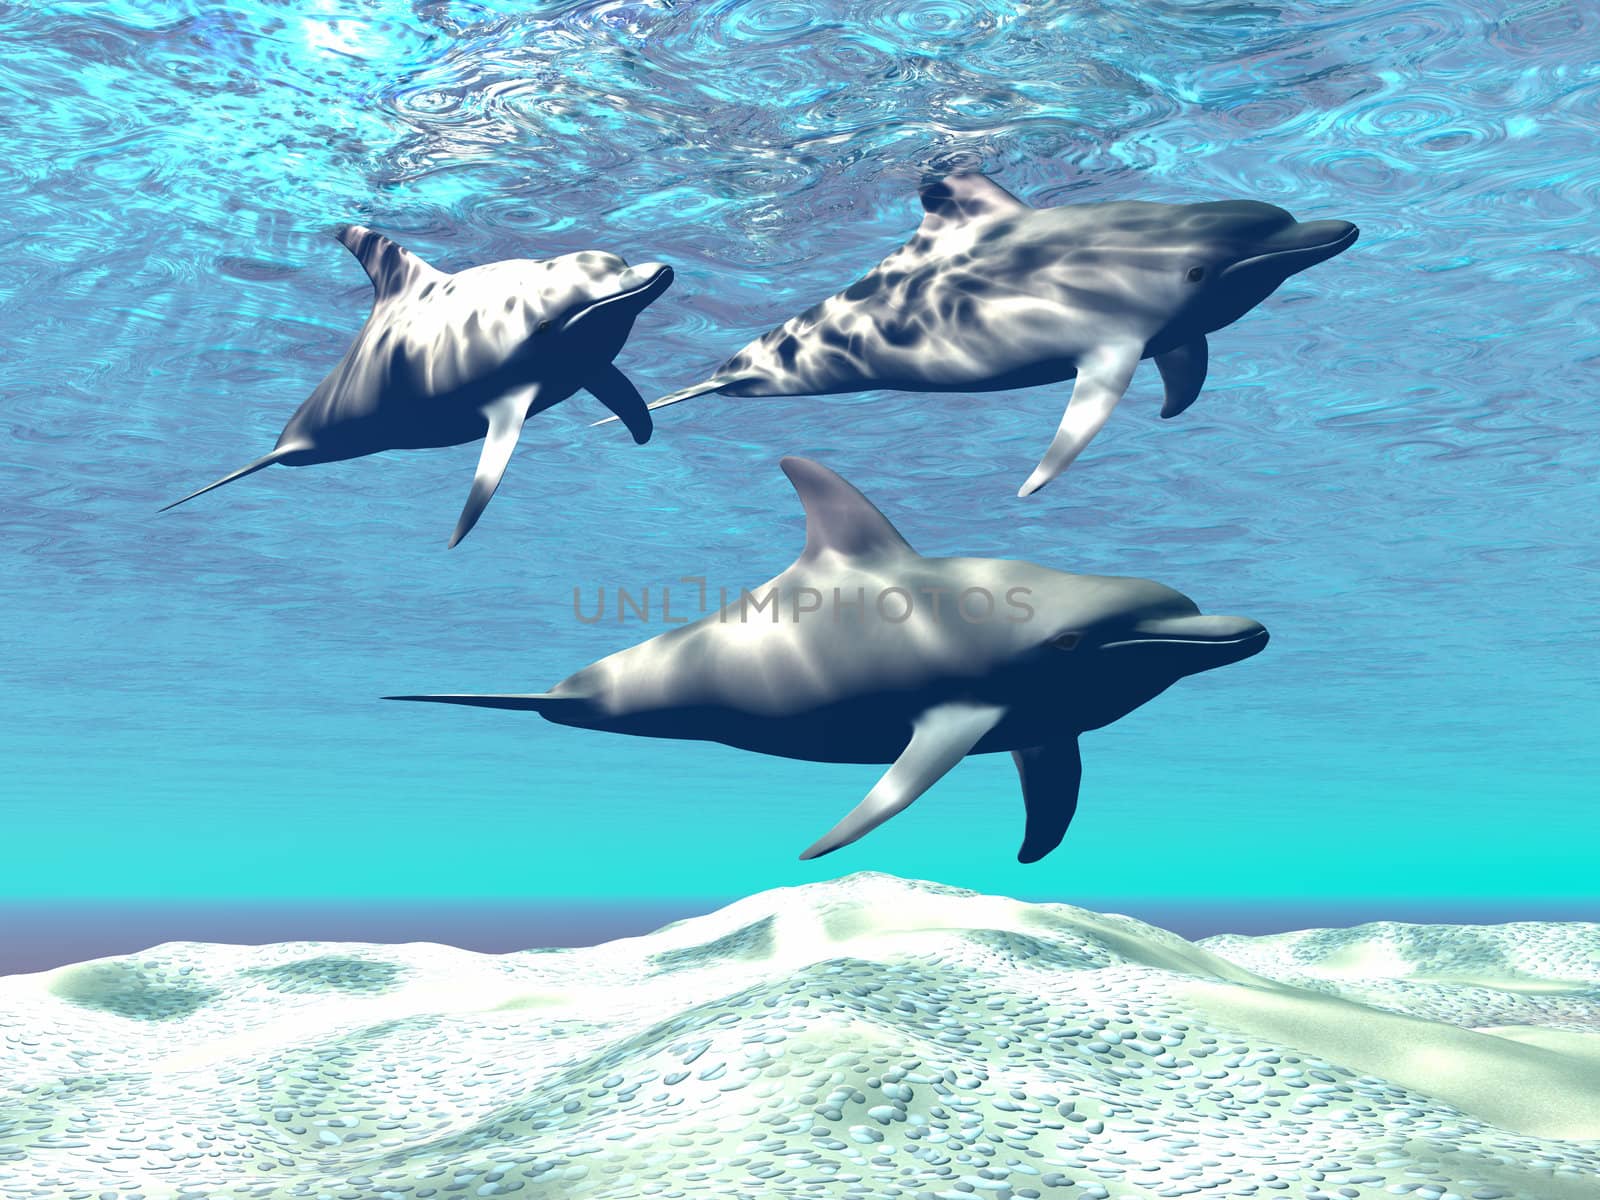 DOLPHINS by Catmando